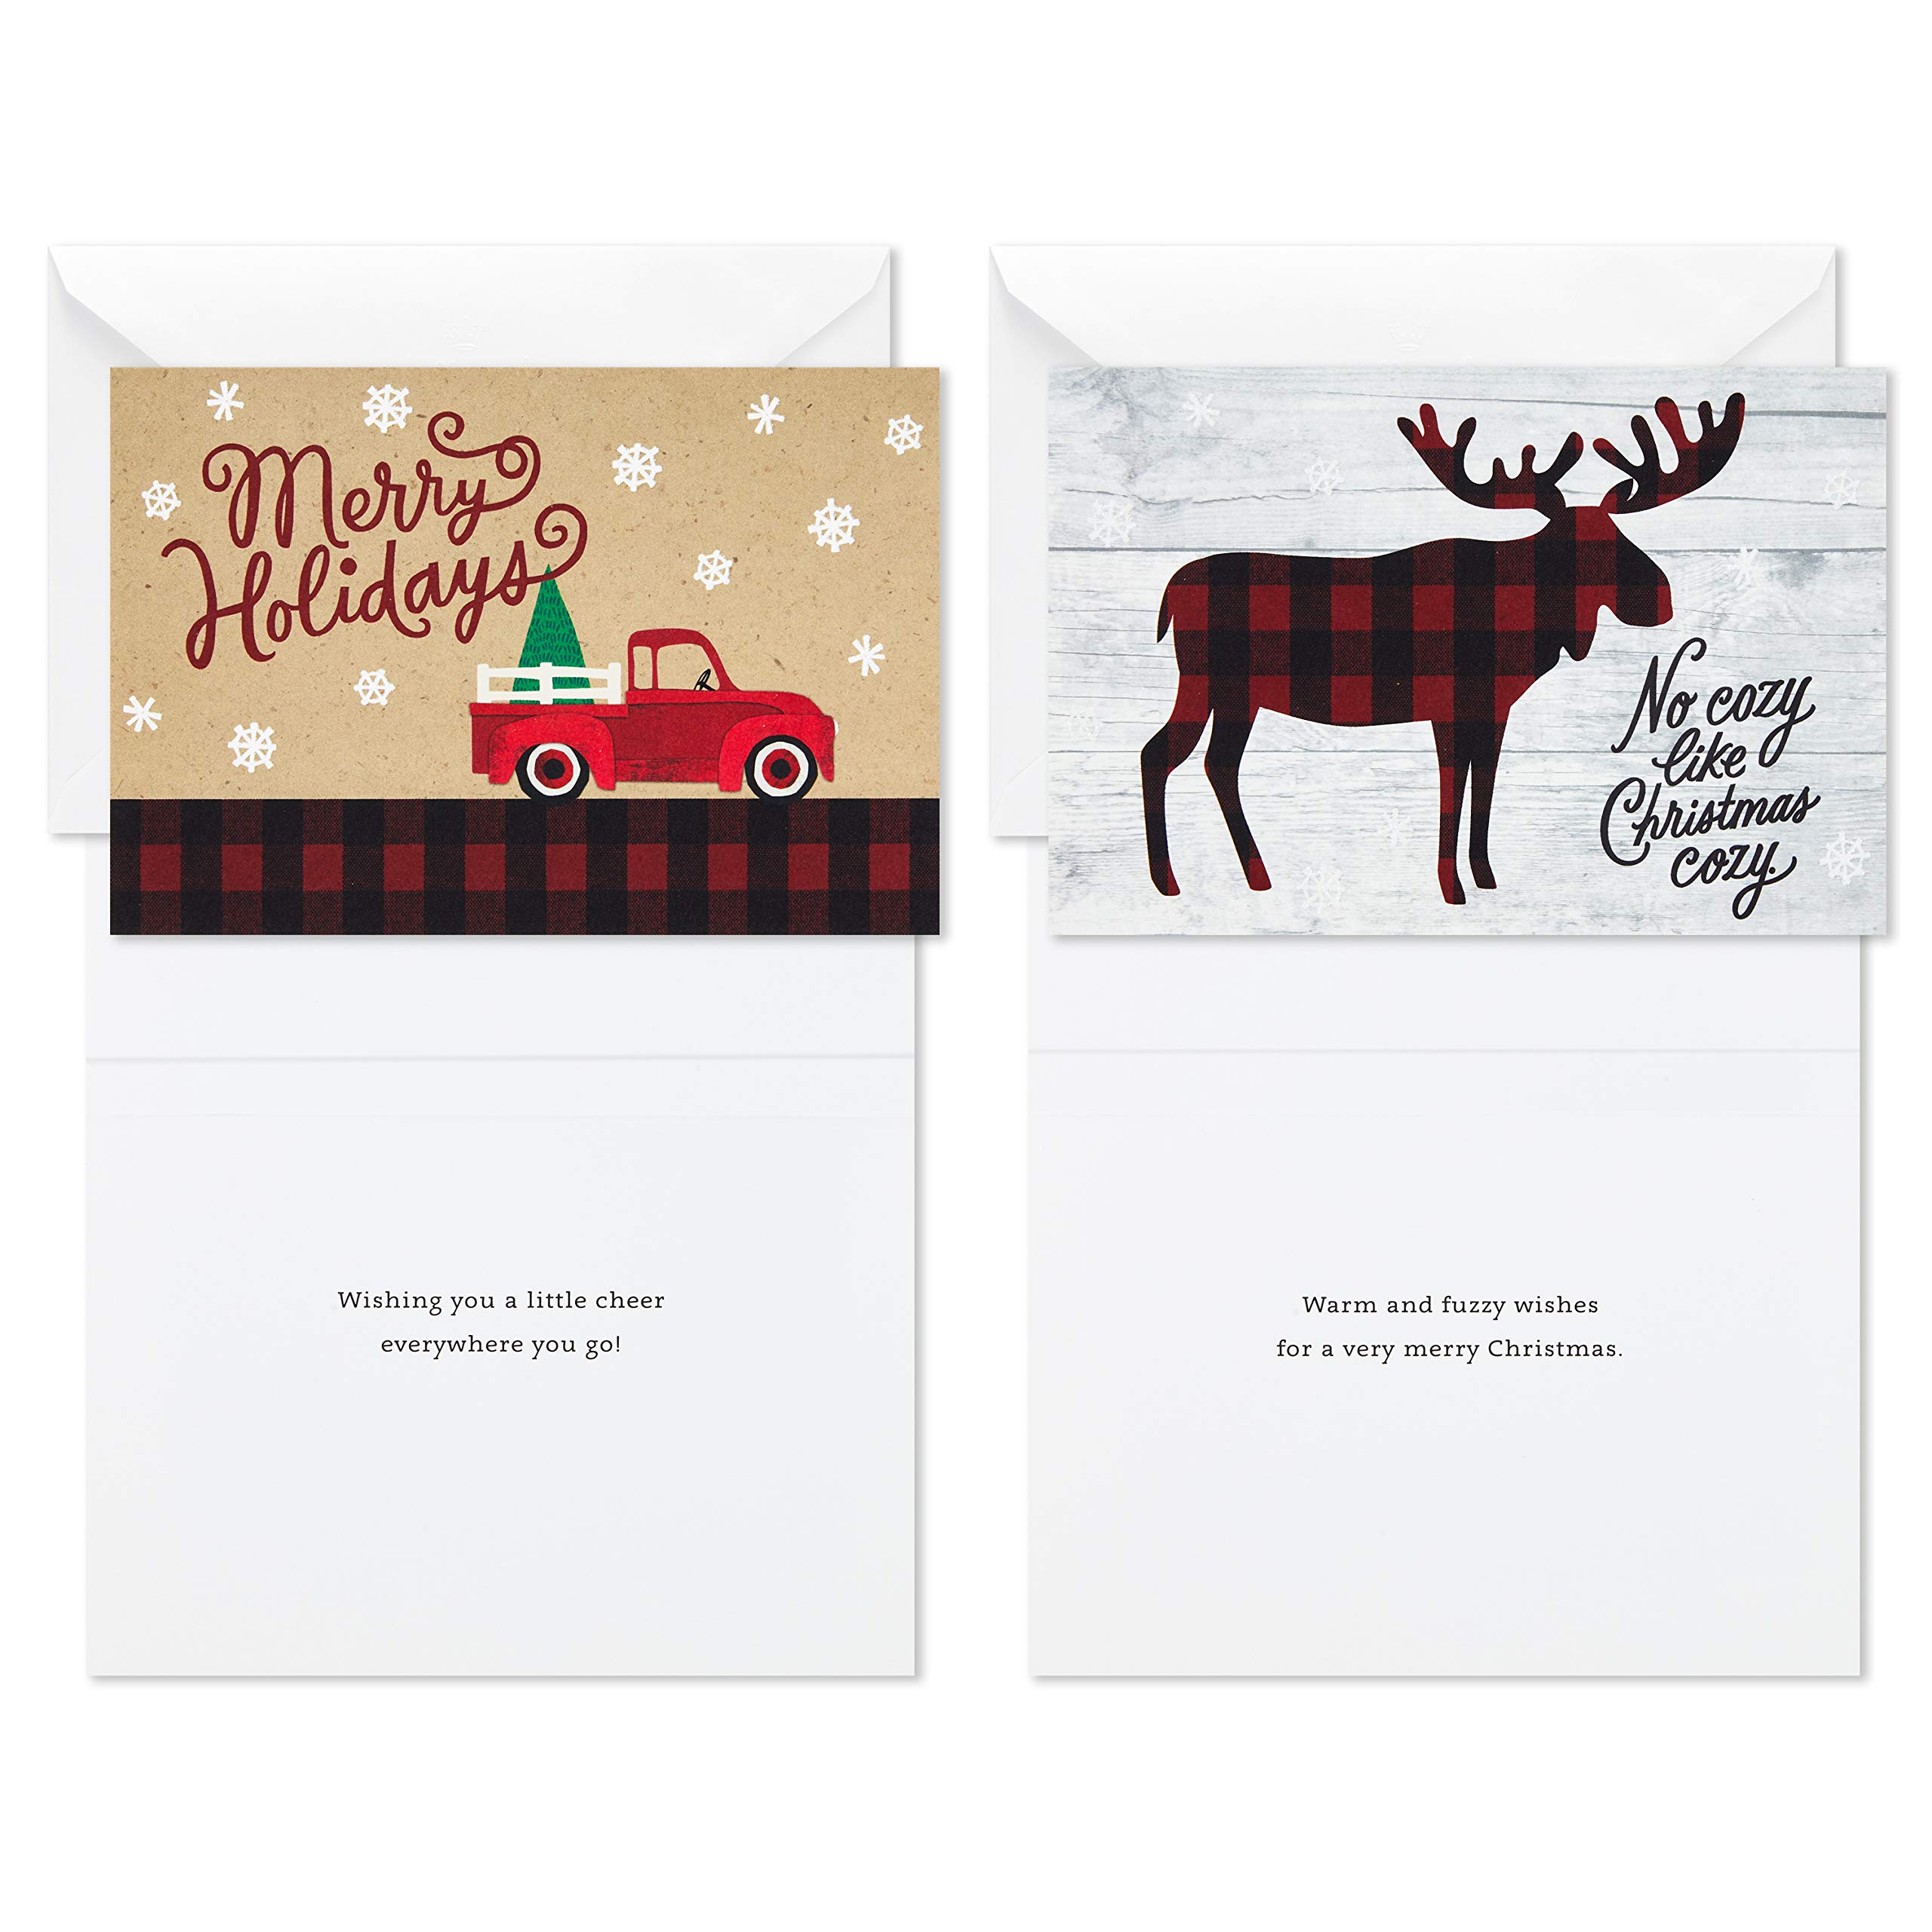 Hallmark Boxed Christmas Cards Assortment, Rustic Holidays (6 Designs, 24 Cards with Envelopes)